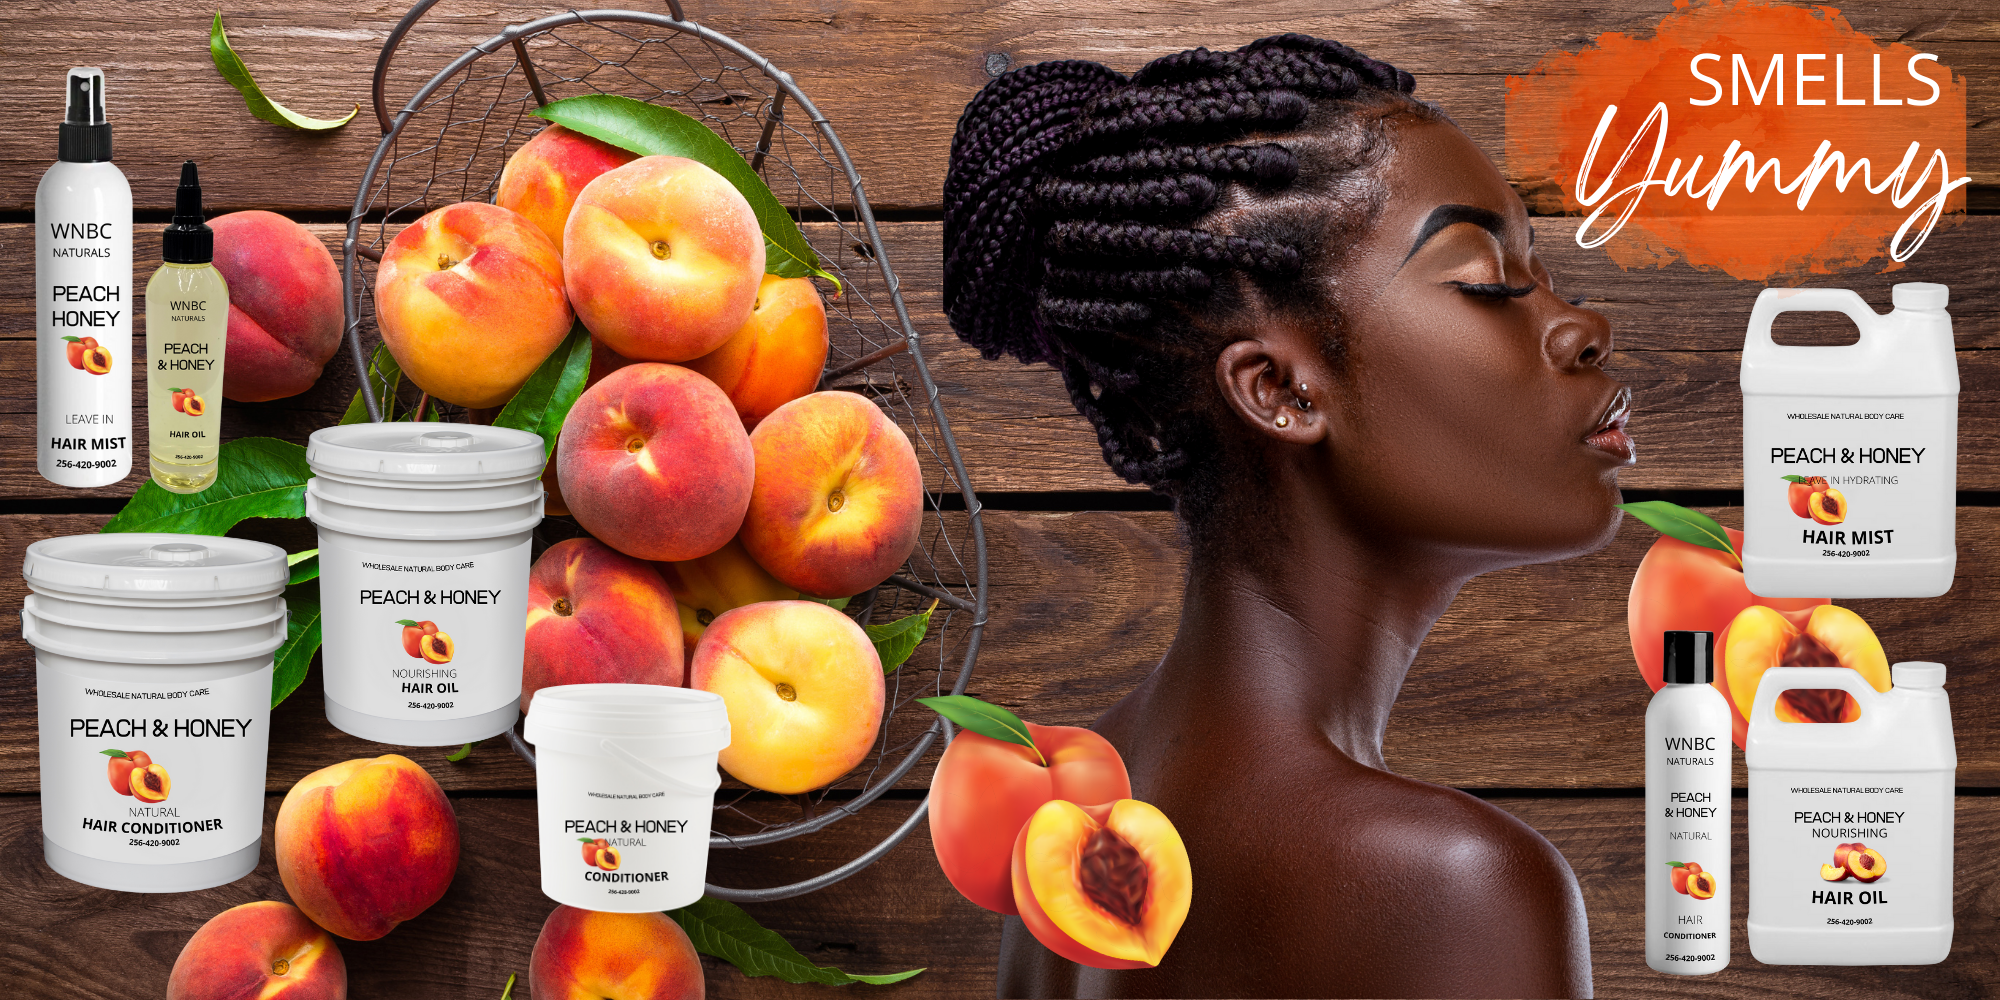 White Label Peach & Honey Hair Oil for your Private Label Hair Products